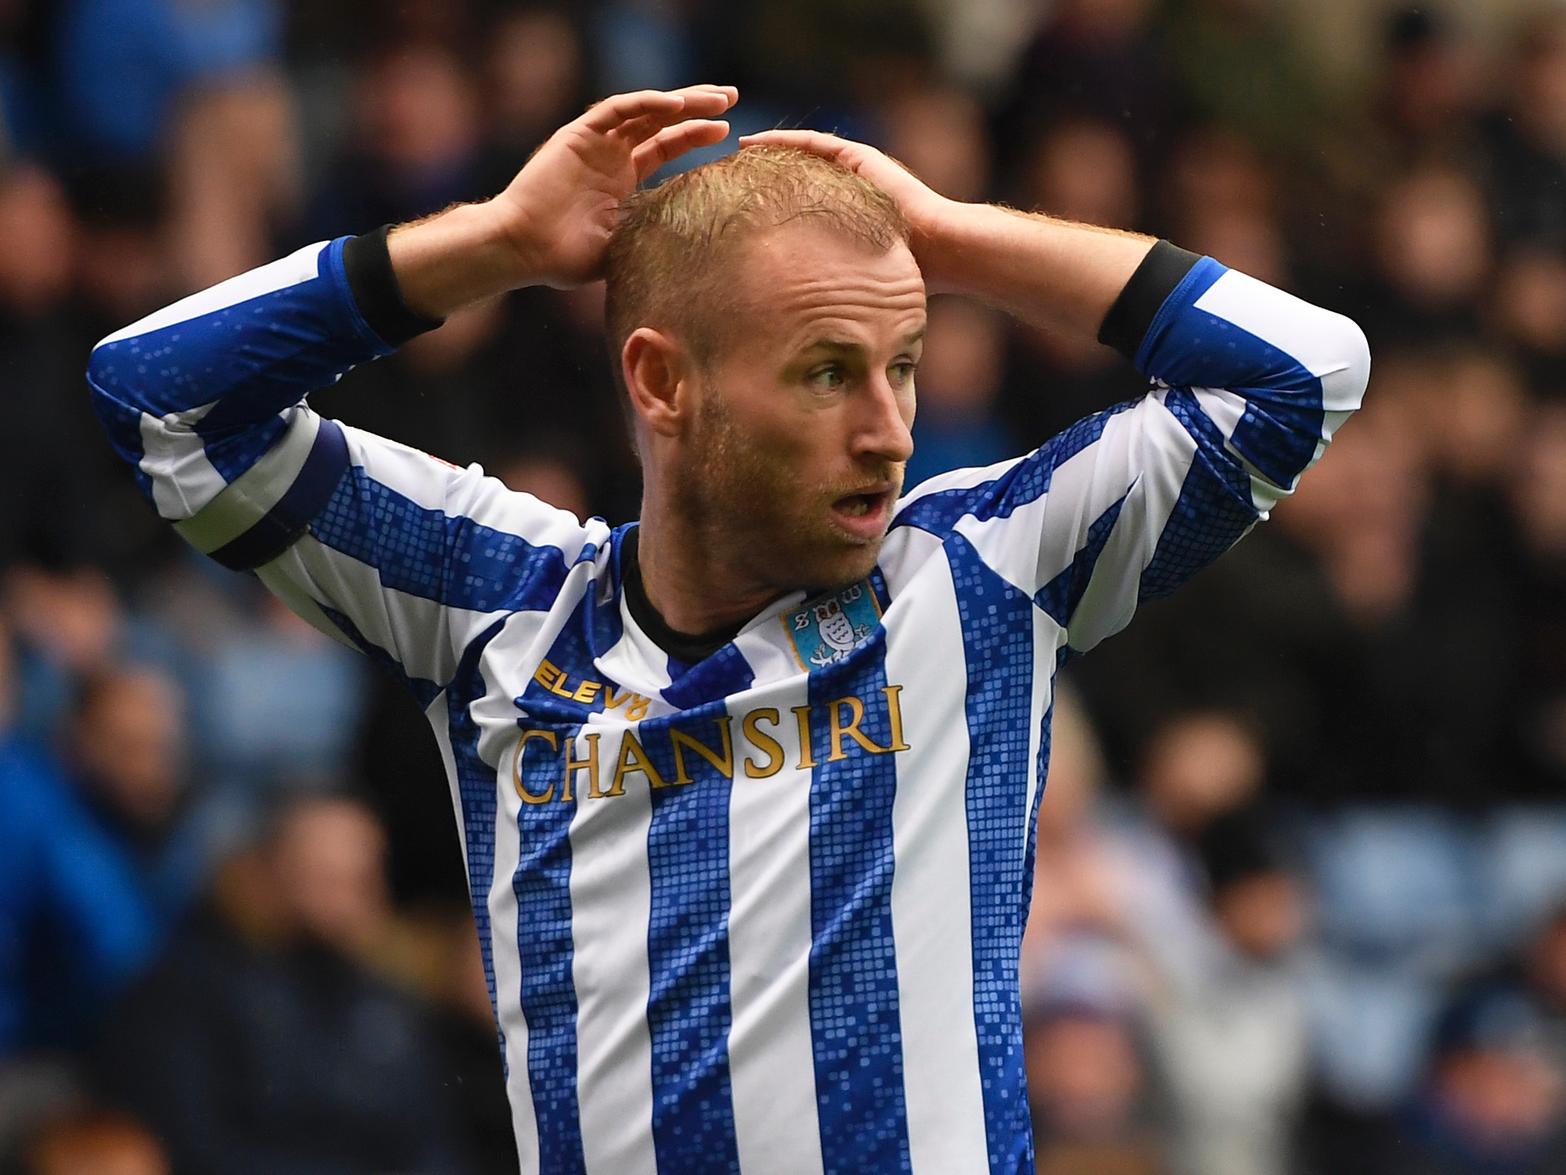 Sheffield Wednesday midfielder Barry Bannan has suggested that his current form won't see him earn a call-up to the next Scotland squad, despite finding some fine form under Garry Monk of late. (Sheffield Star)